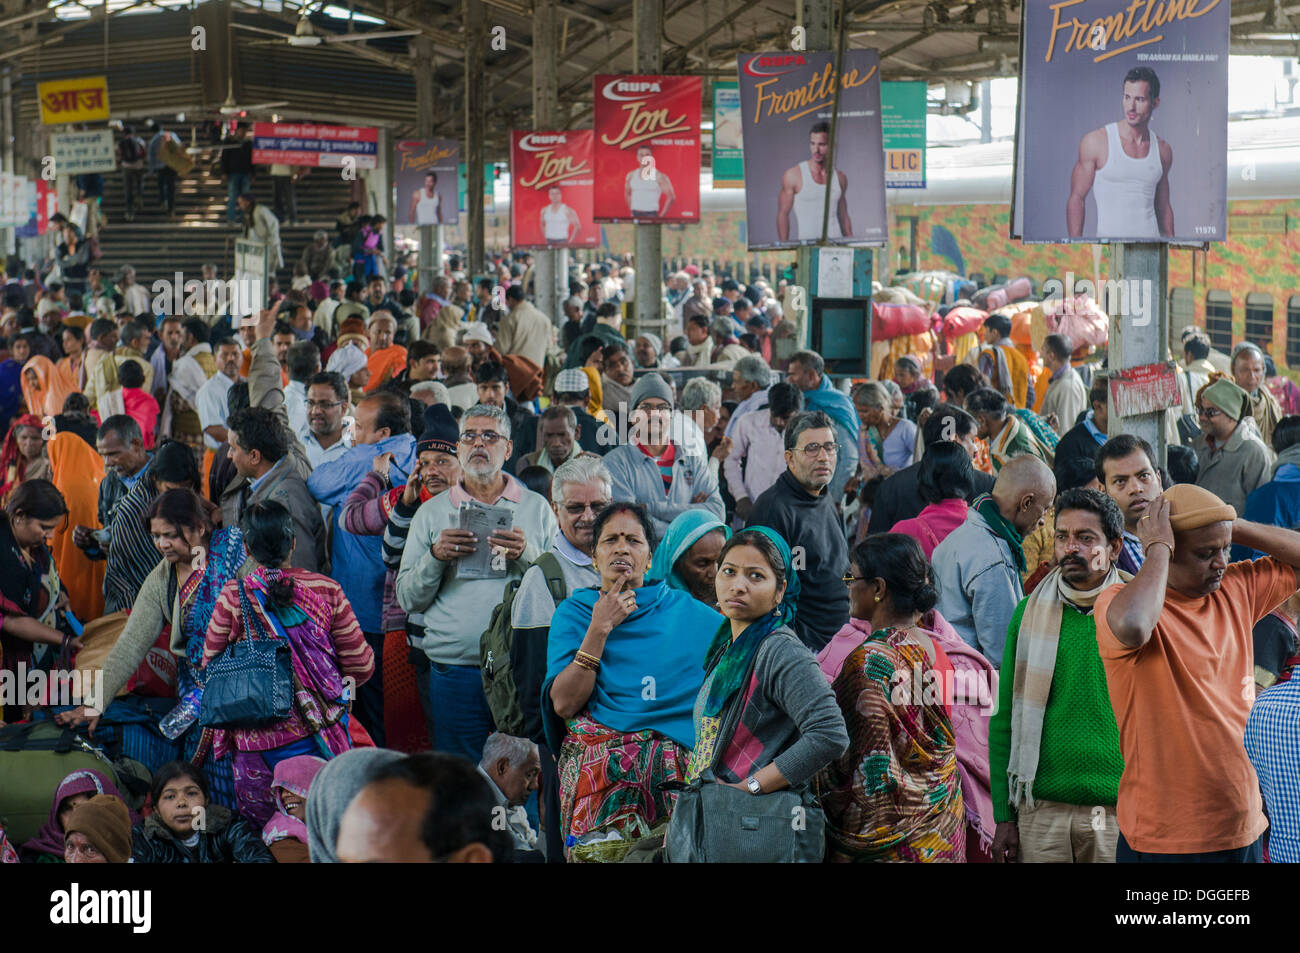 Crowds of people waiting for delayed trains on a platform of the railway station, Allahabad, Uttar Pradesh, India Stock Photo